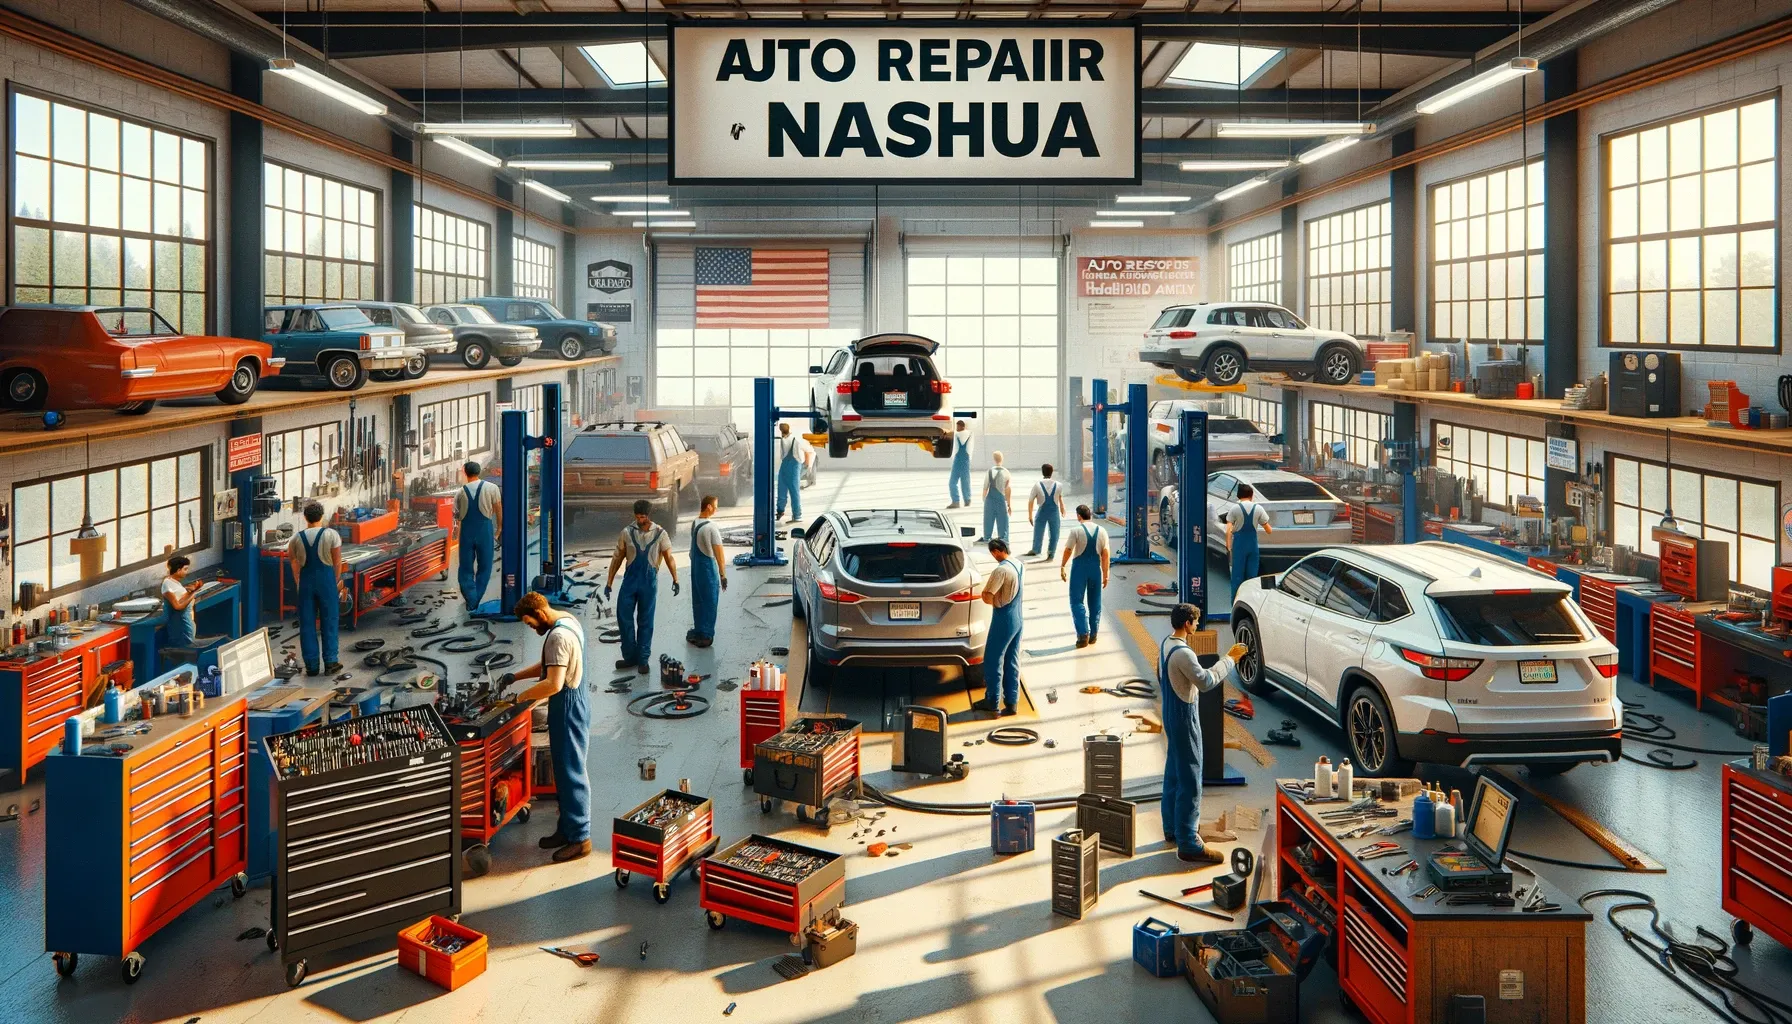 Auto Repair Nashua: Experience Matters When It Comes to Car Care